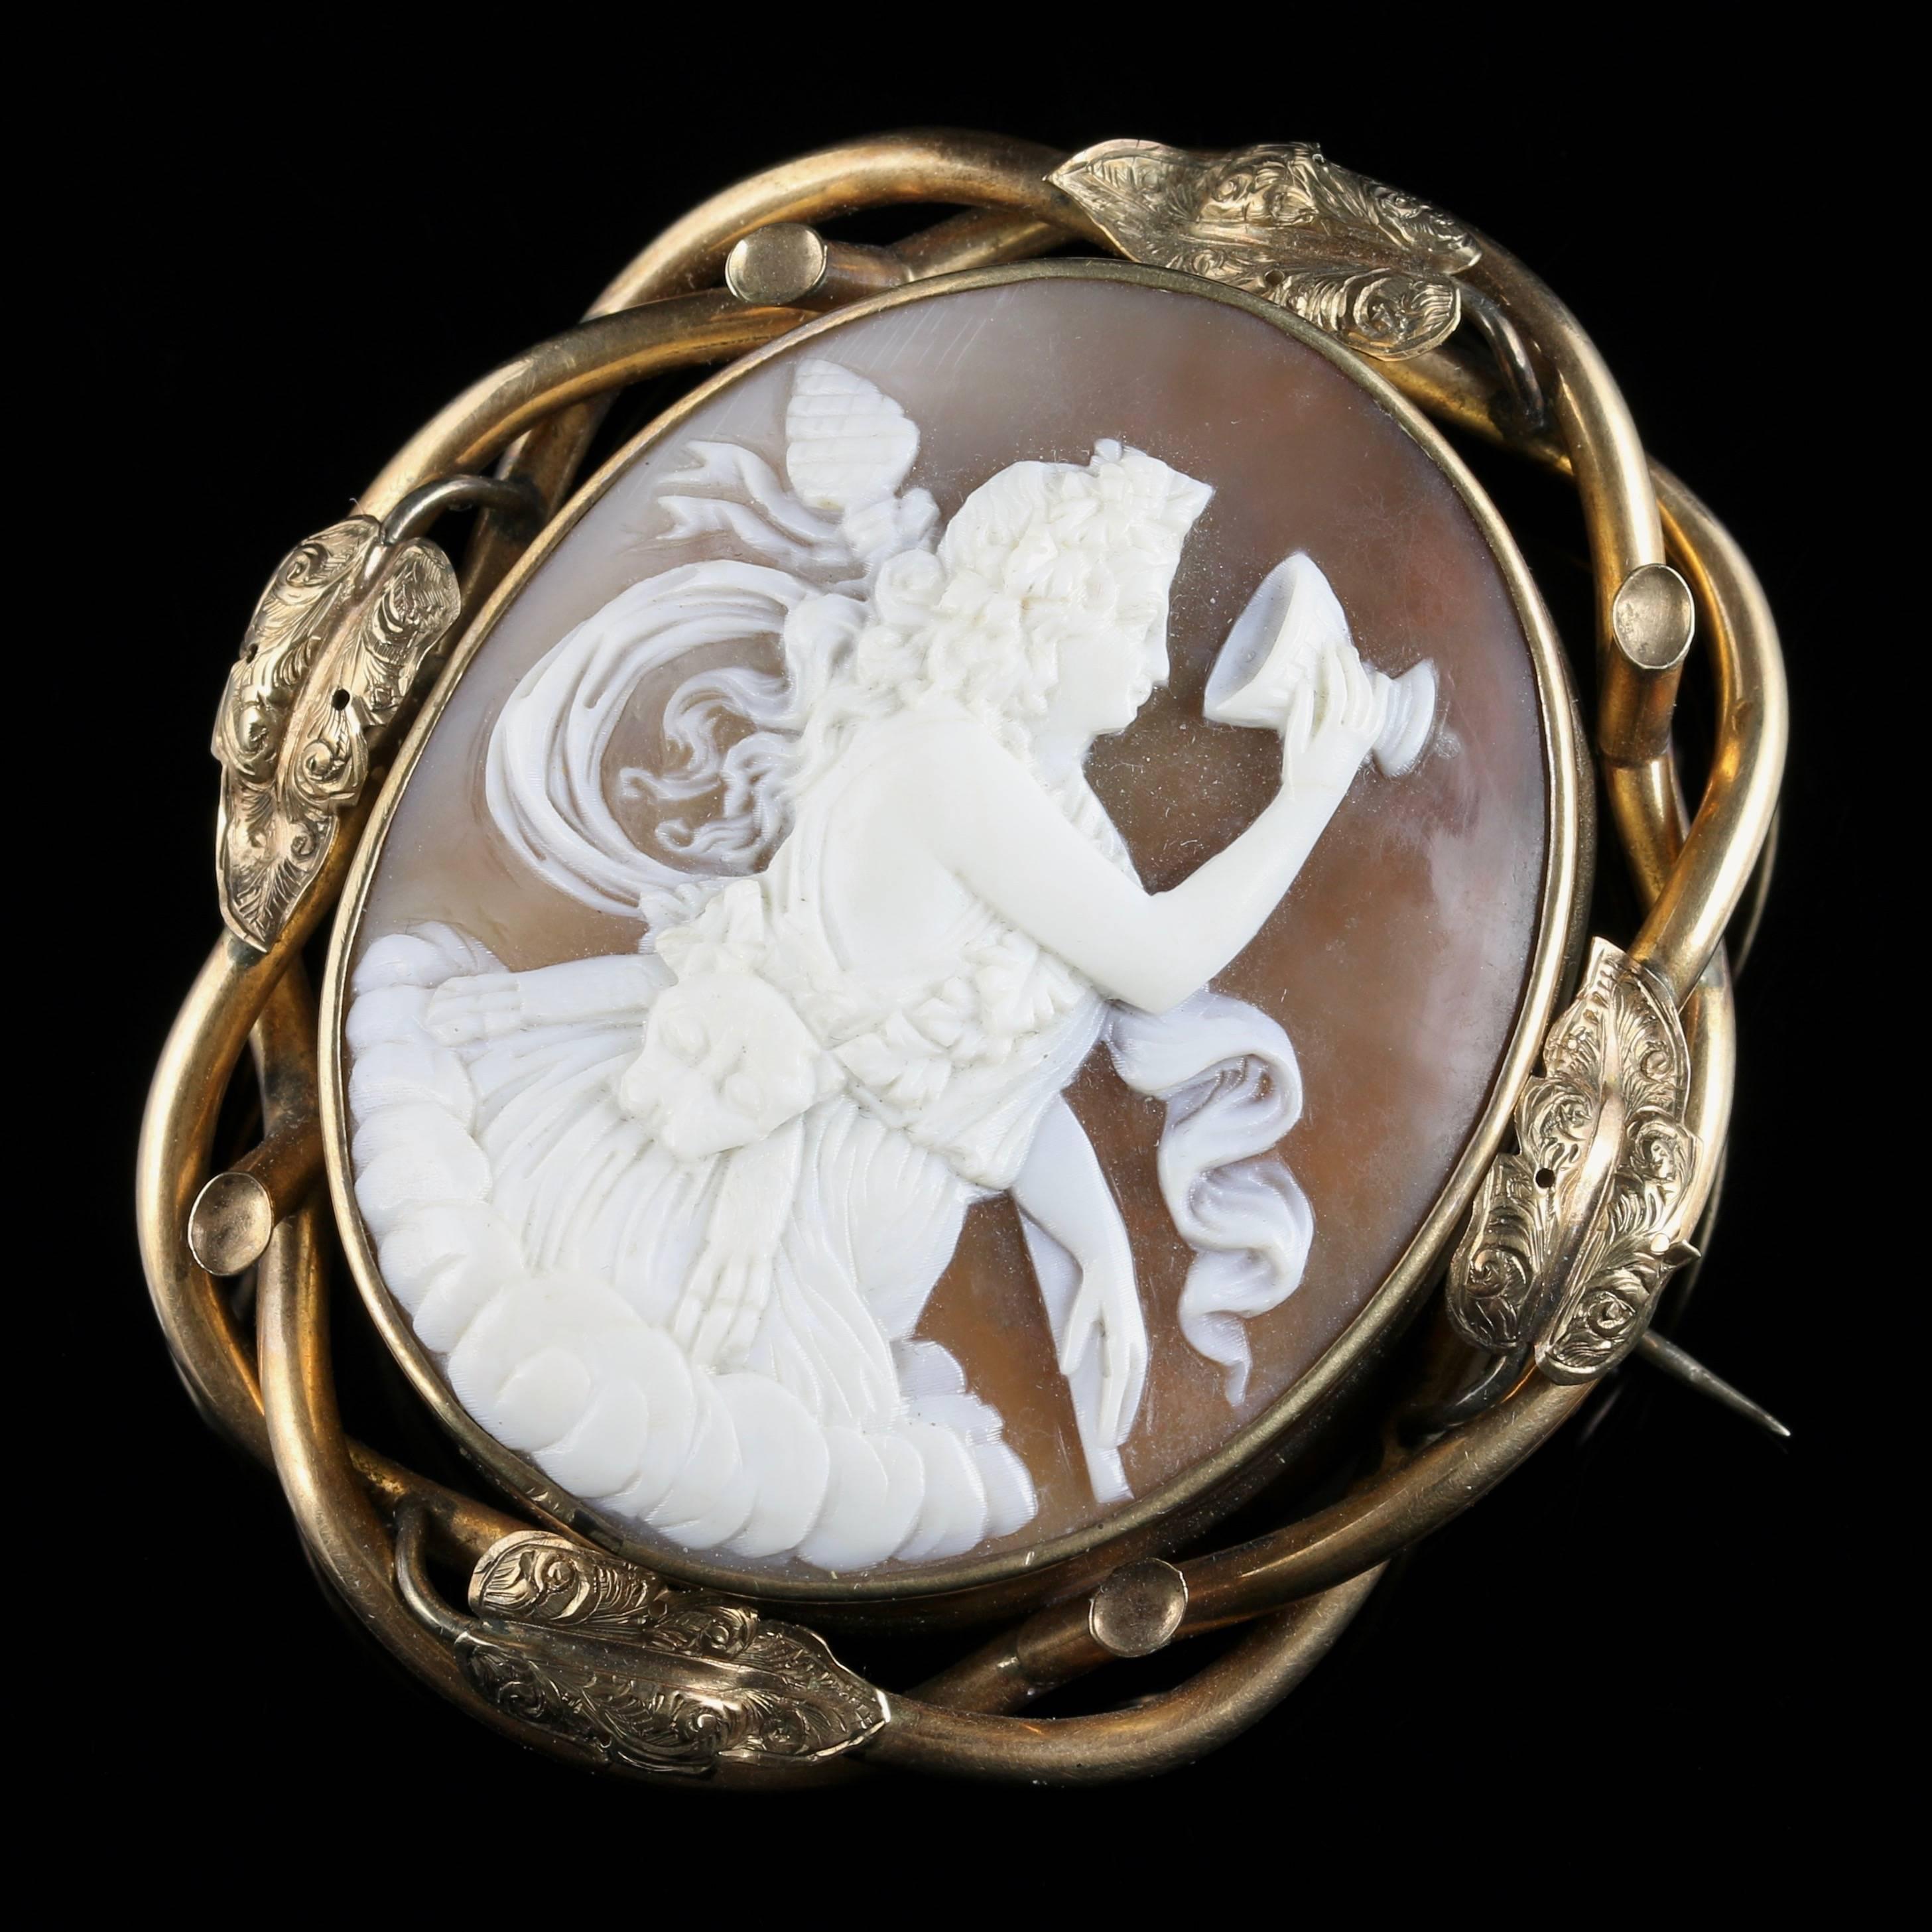 For more details please click continue reading down below...

This stunning antique Victorian cameo brooch is made with Bull mouth shell. Circa 1860

Set in 18ct Gold gilt.

The wonderful Cameo is set in Bull mouth shell and depicts a beautiful